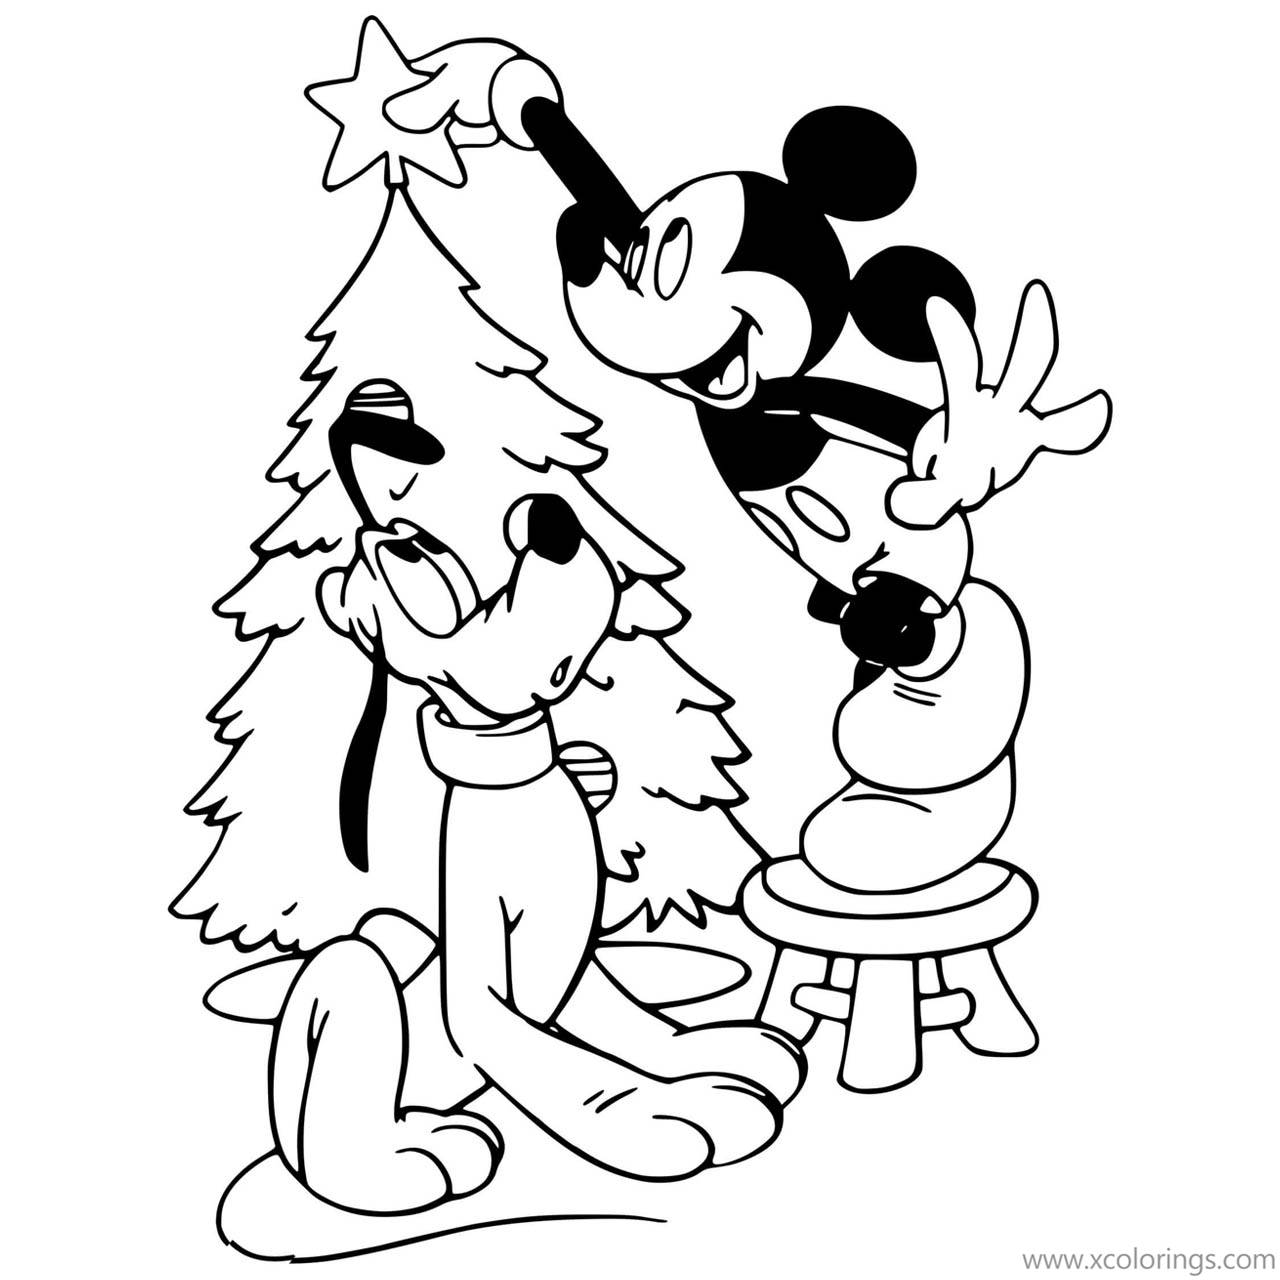 Mickey Mouse Christmas Coloring Page With Pluto - Coloring Home